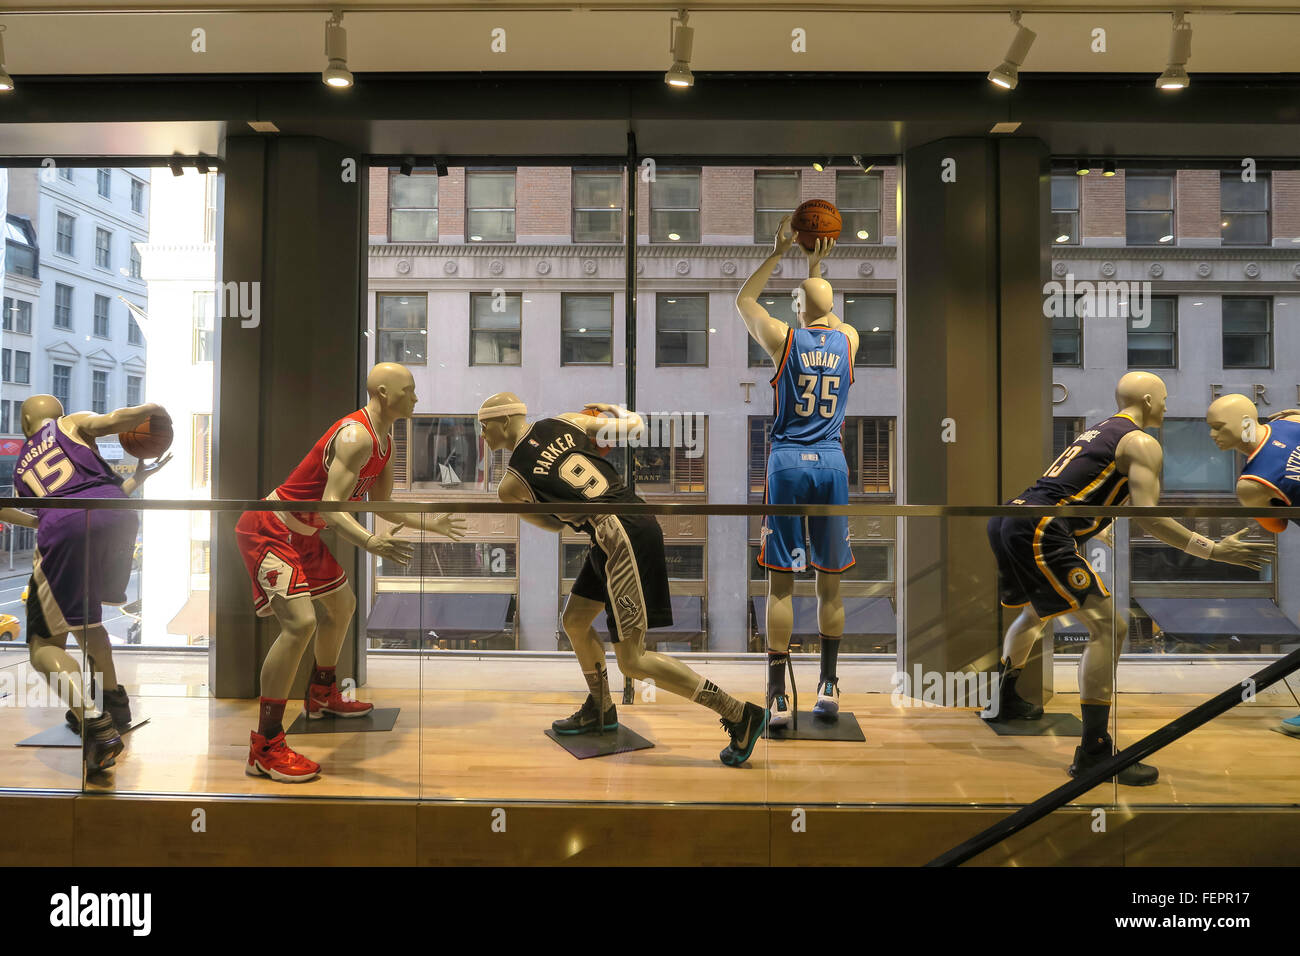 545 Fifth Avenue, NBA Store NYC